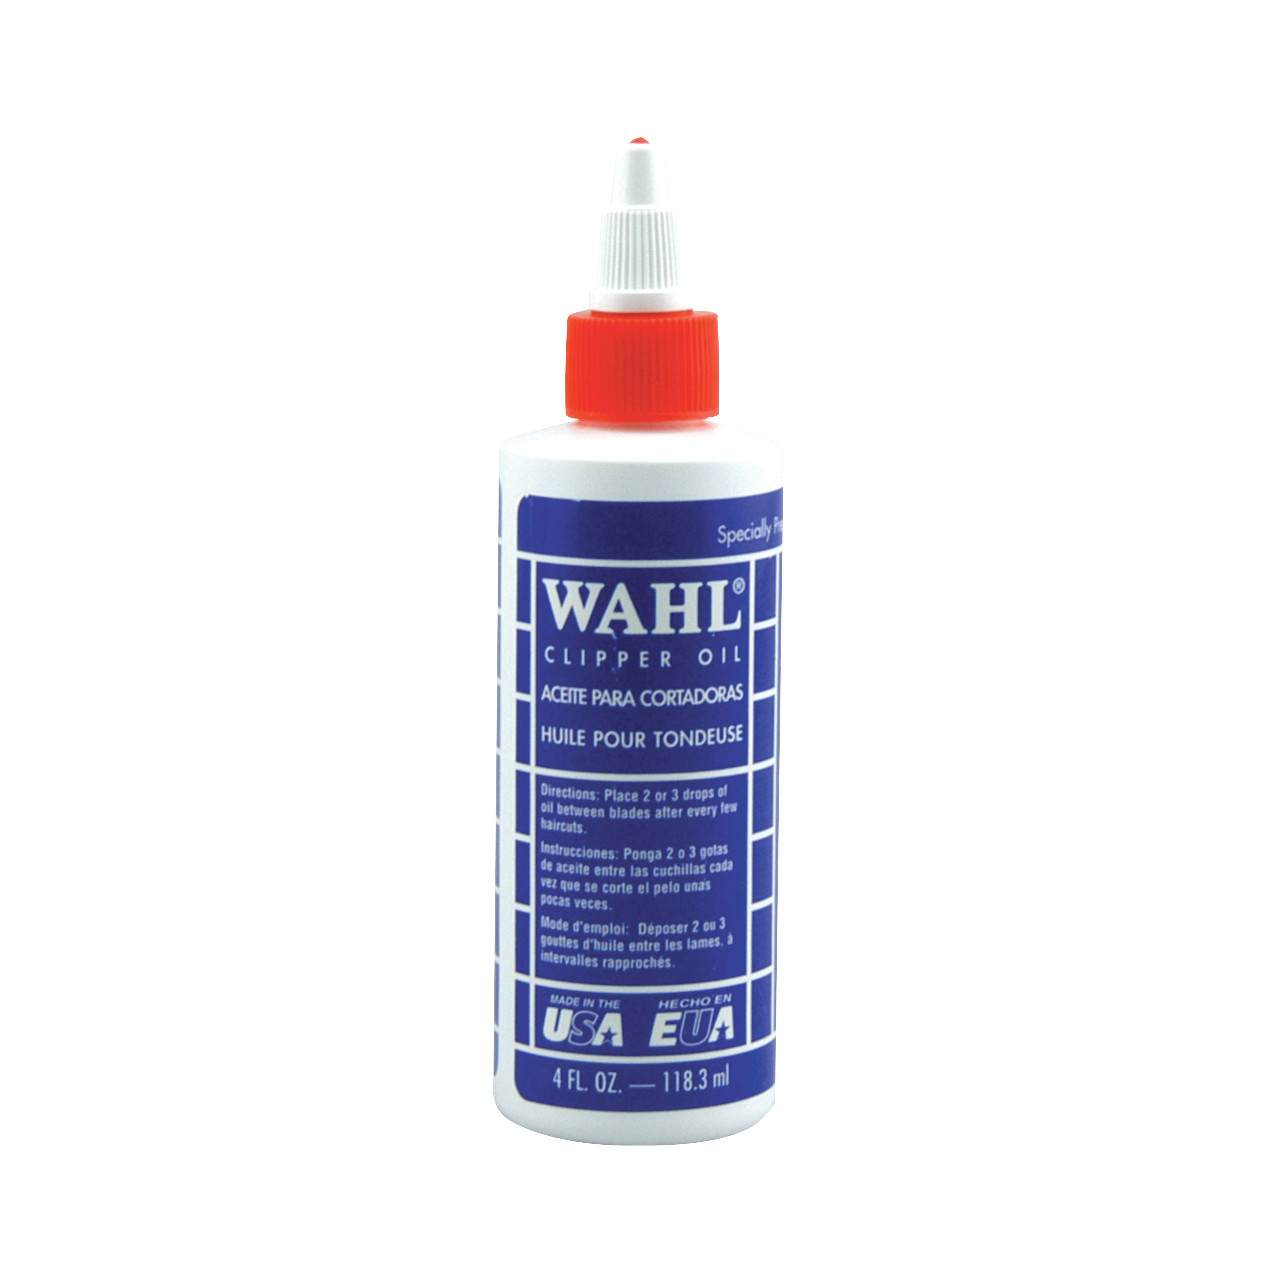 wahl clipper oil instructions